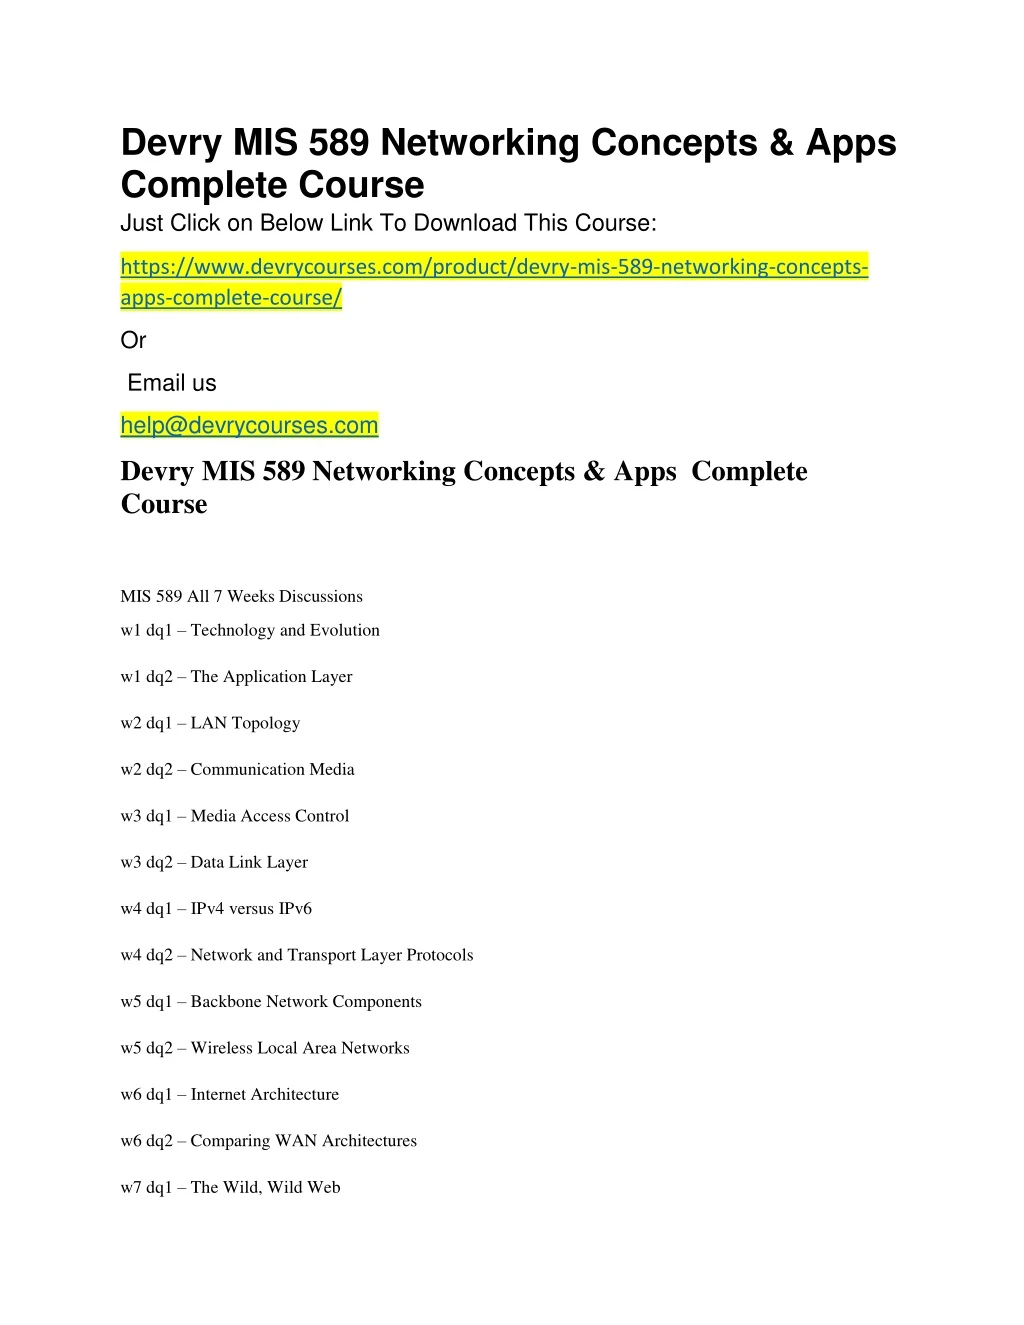 devry mis 589 networking concepts apps complete